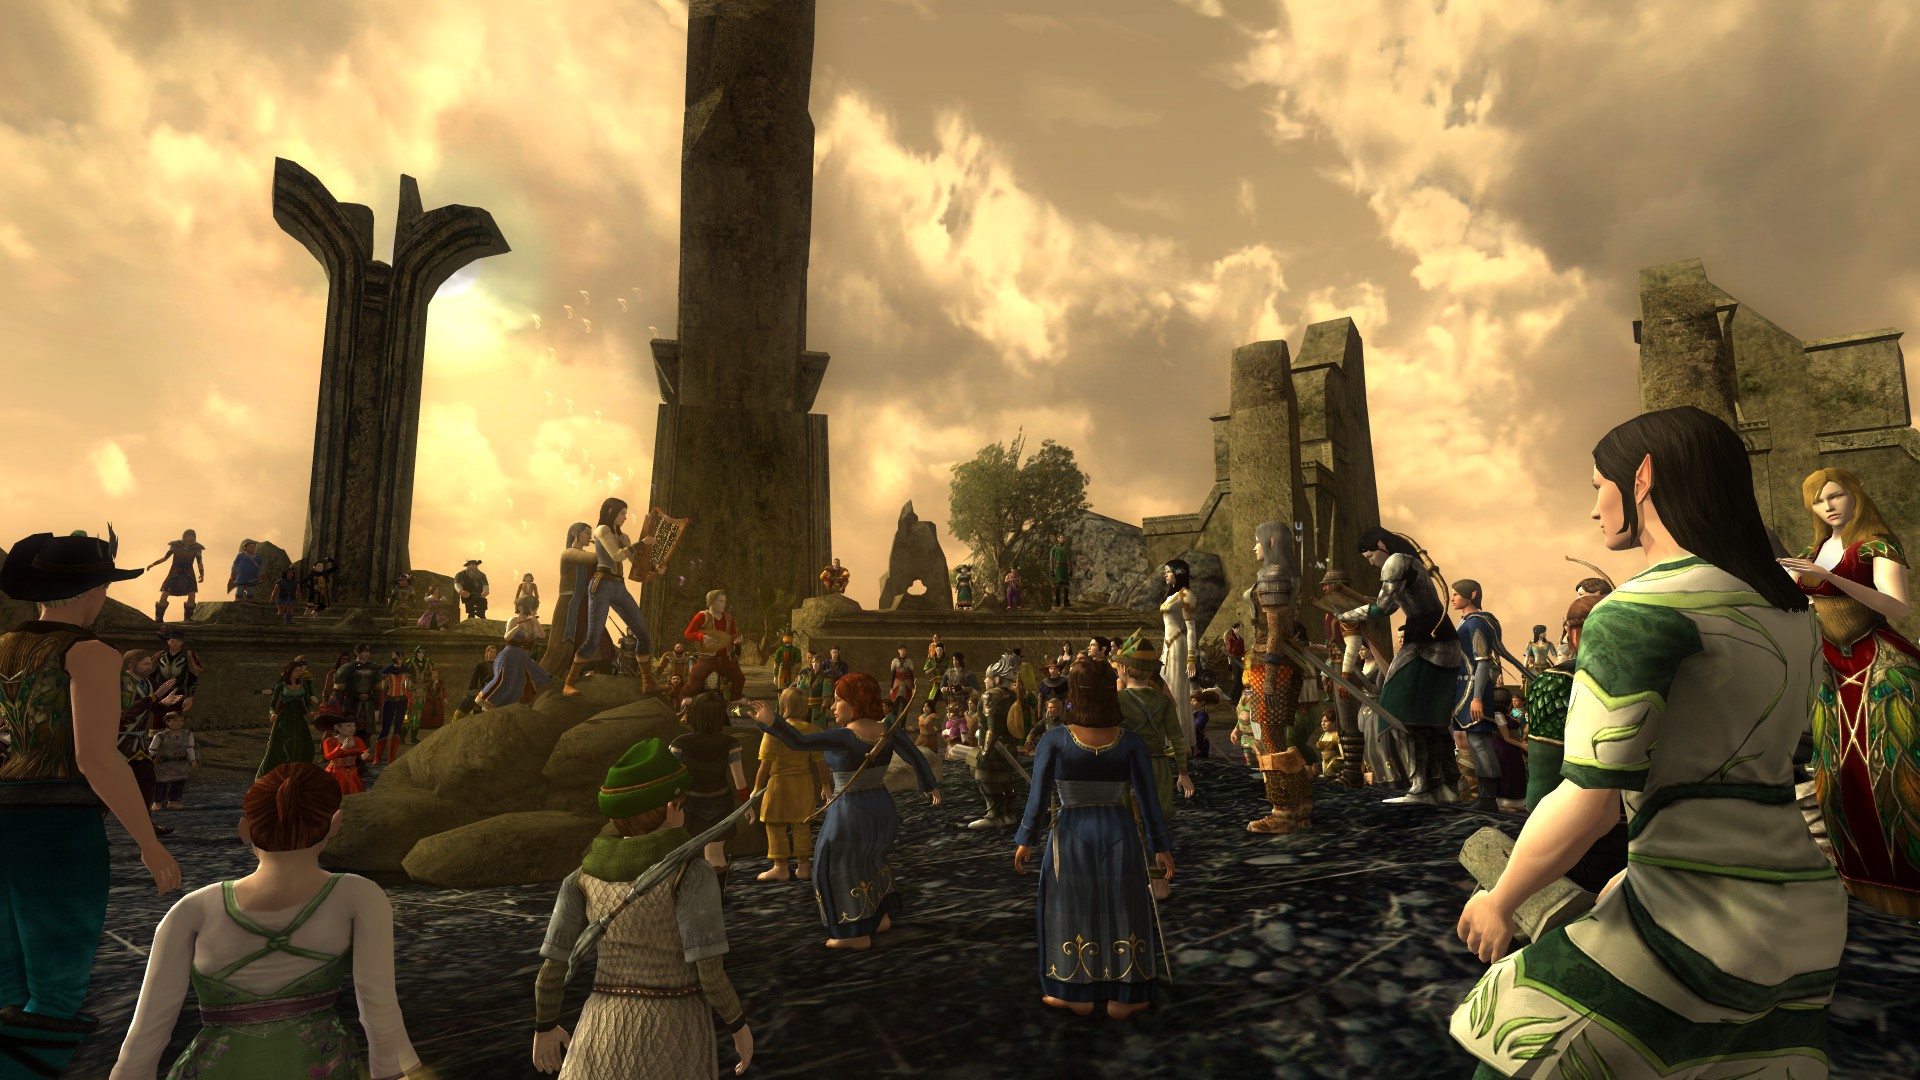 Lord of the Rings Online is celebrating its 15th anniversary by making more of  the game free to play